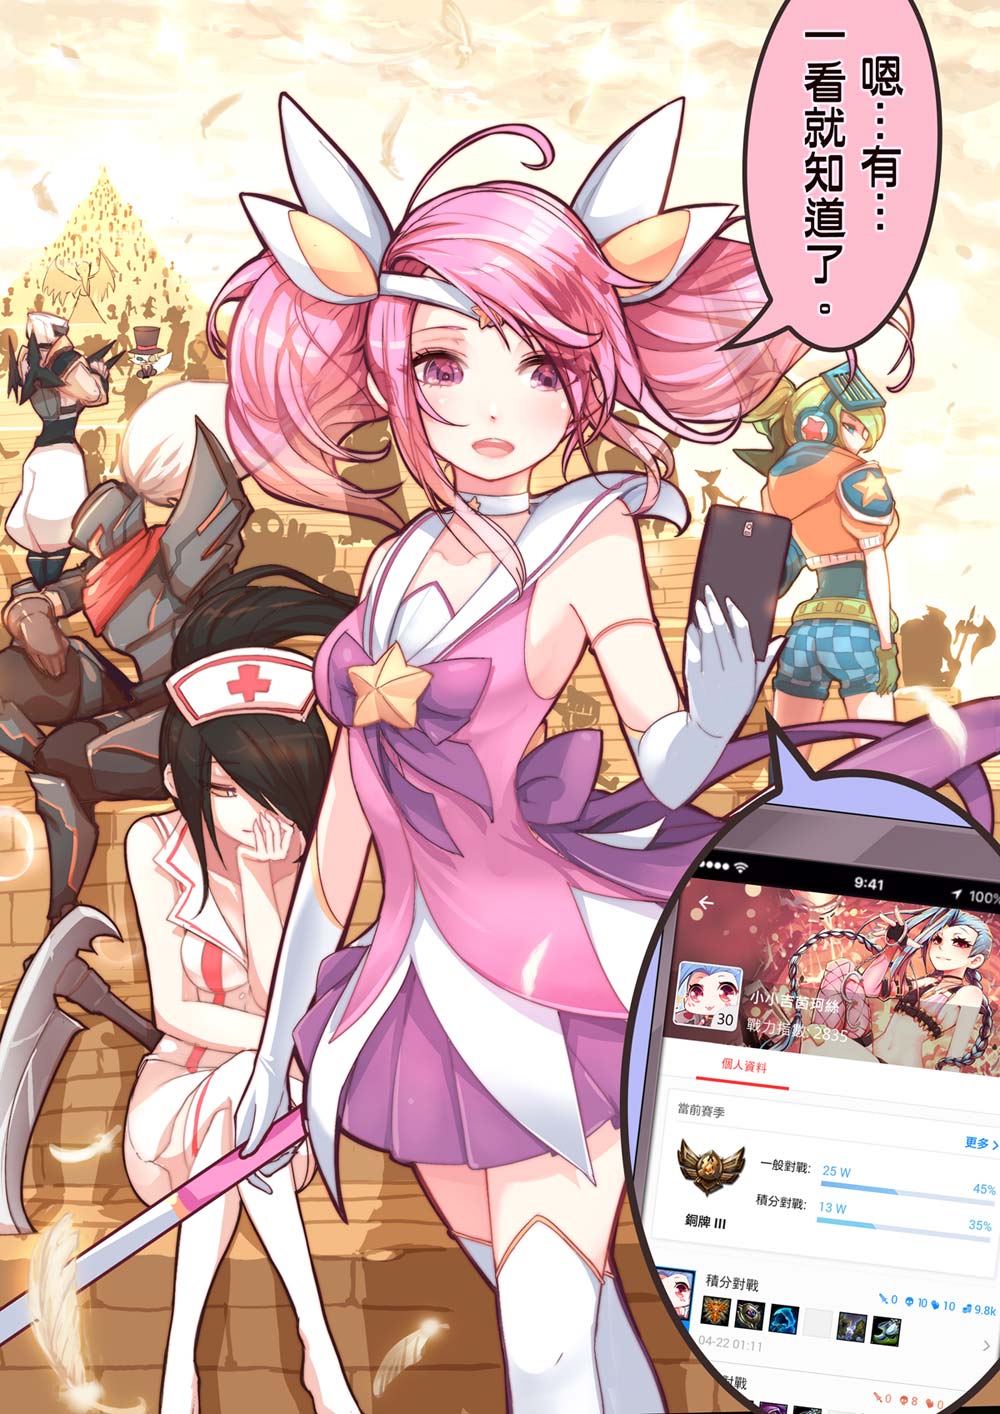 4girls akali alternate_costume armor ass beancurd black_hair blush cellphone choker crossed_arms crossed_legs elbow_gloves from_behind gloves gnar_(league_of_legends) green_eyes green_hair hair_over_one_eye hand_on_own_chin headphones highres jinx_(league_of_legends) knee_up league_of_legends leg_up long_hair luxanna_crownguard magical_girl morgana multiple_girls nurse over_shoulder partially_translated phone pink_eyes pink_hair riven_(league_of_legends) scarf shen short_hair short_shorts shorts shuriken silhouette sitting small_breasts smartphone sword thigh-highs translation_request twintails violet_eyes weapon weapon_over_shoulder yellow_eyes zed_(league_of_legends)